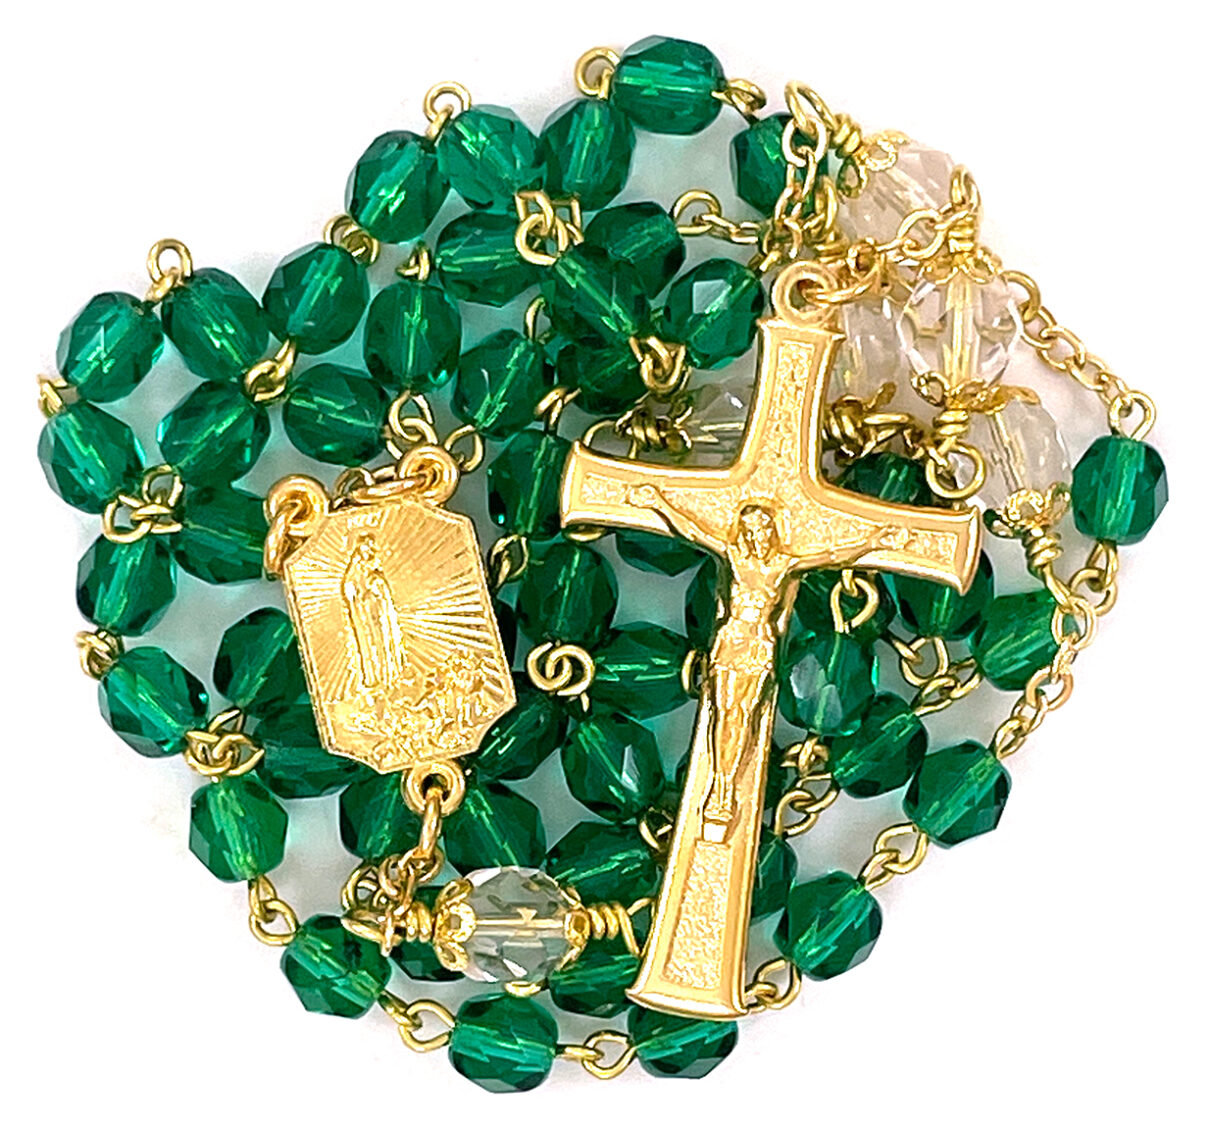 Our Lady of Fatima Green Rosary ($28.99 CAD)